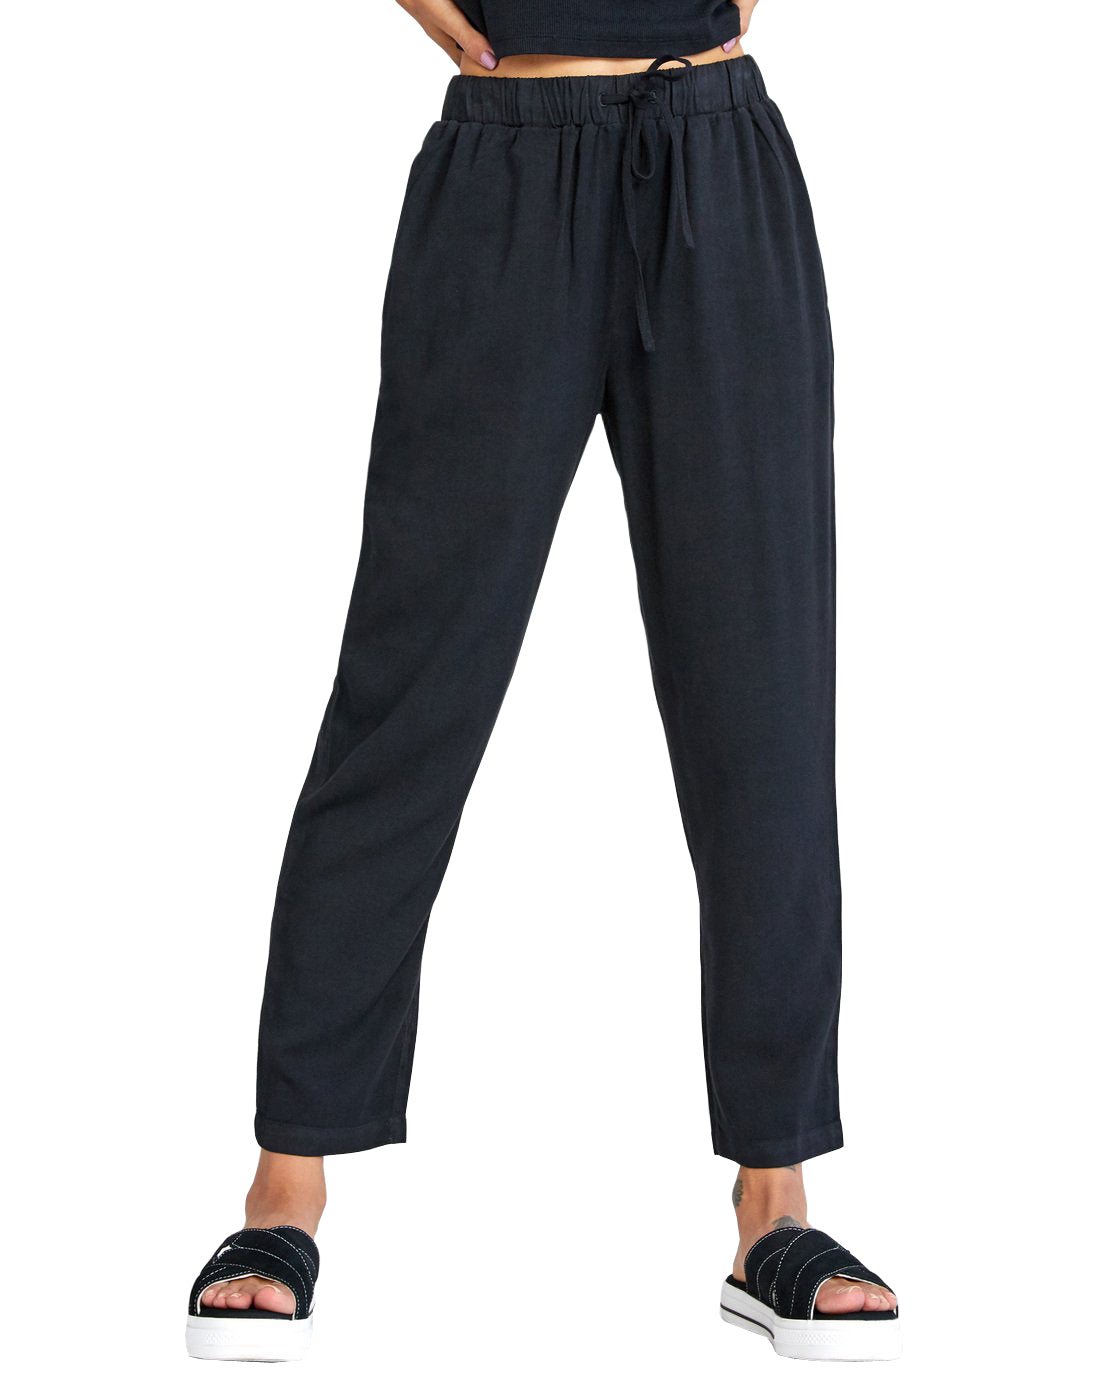 RVCA  Blank Stare Relaxed Fit Pants BLK M